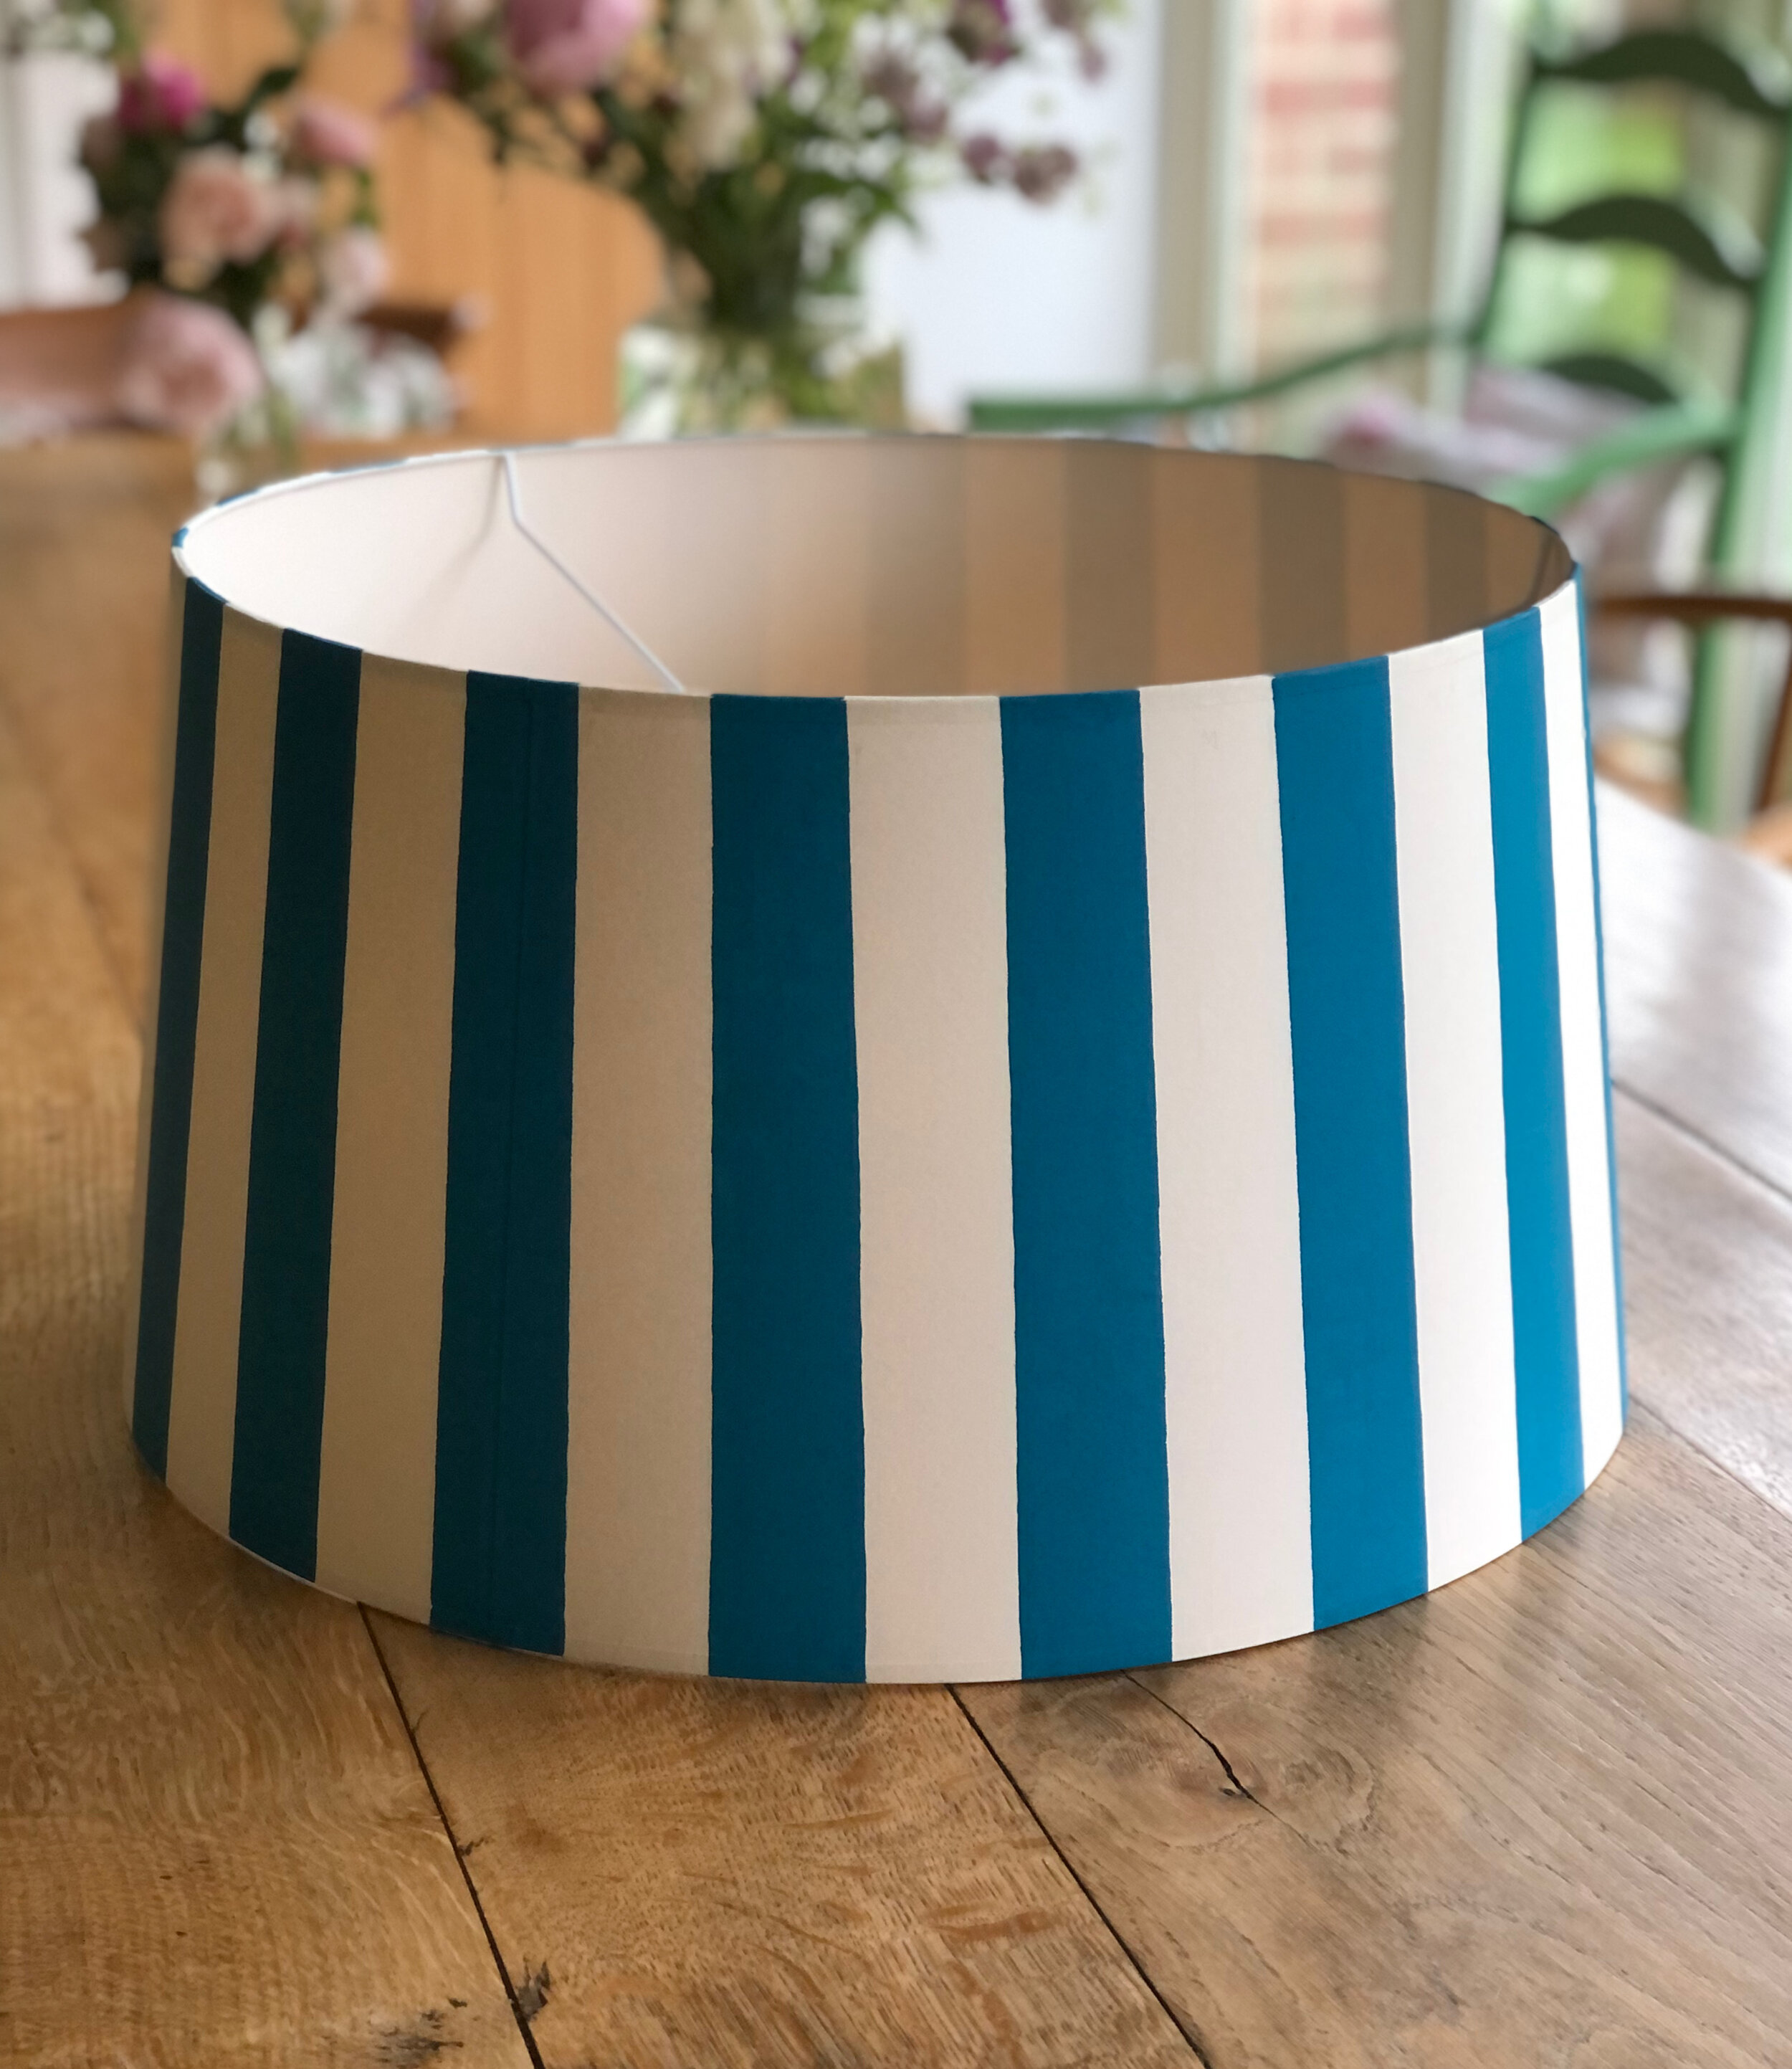 turquoise stripes on a drum shade